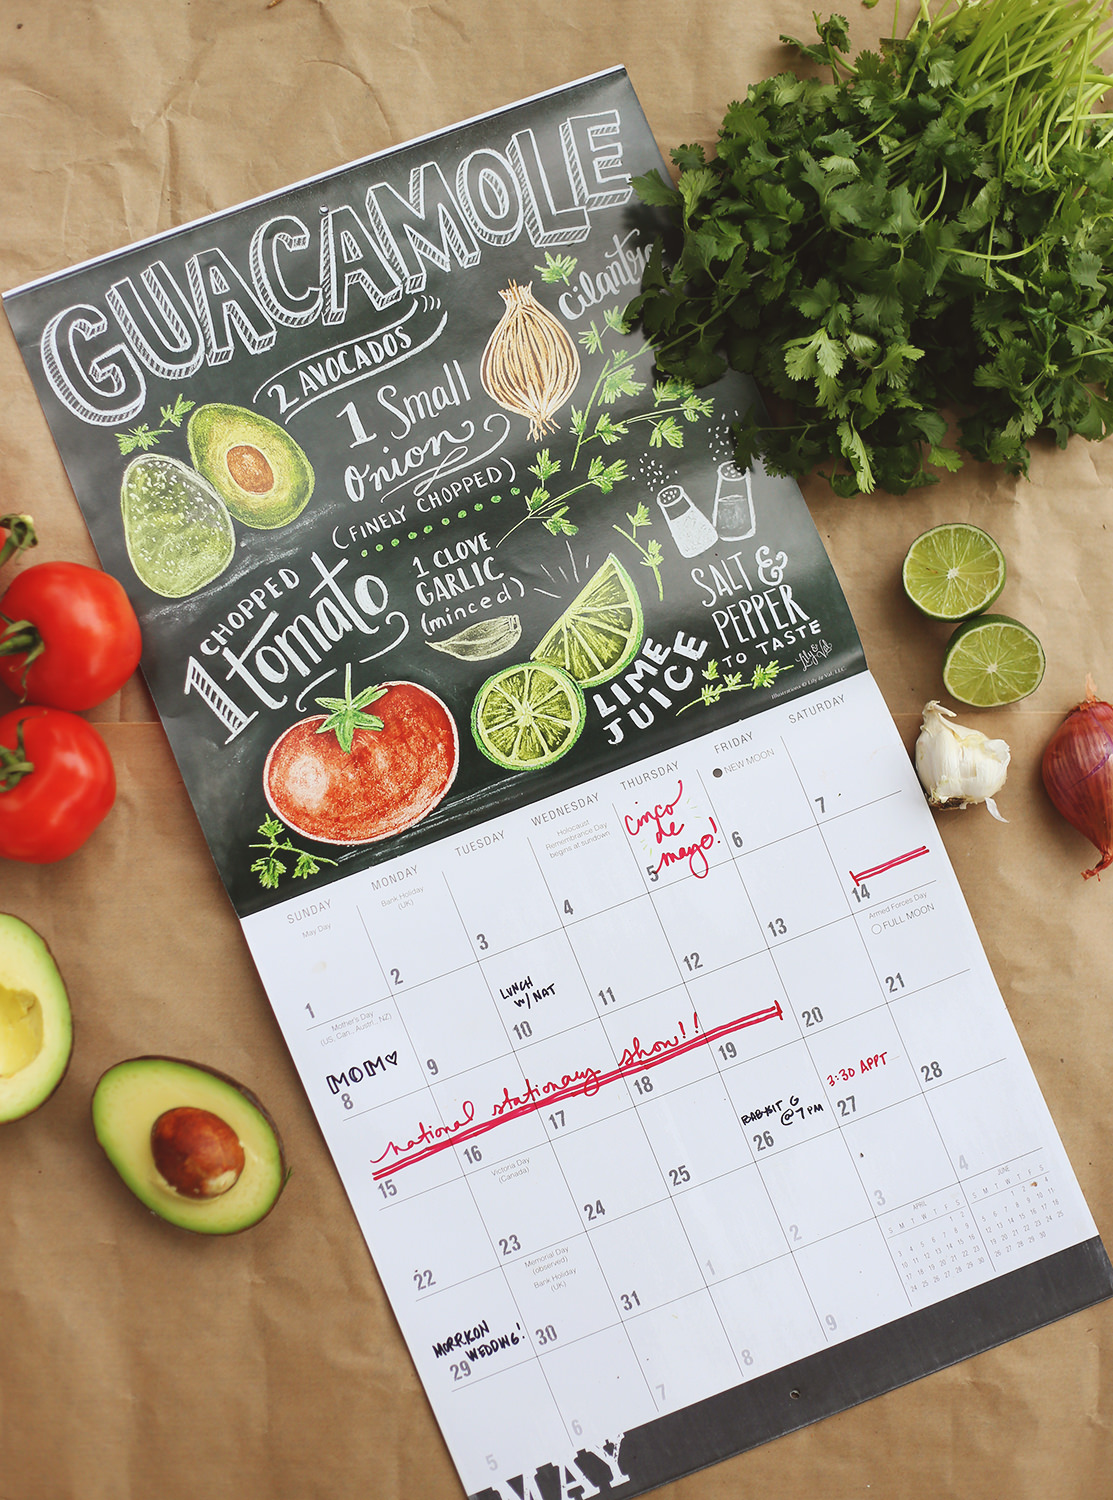 Try our perfect guacamole recipe from our 2016 Recipe Calendar! To kick things up a notch, see our three ways to make your guacamole extra delicious!